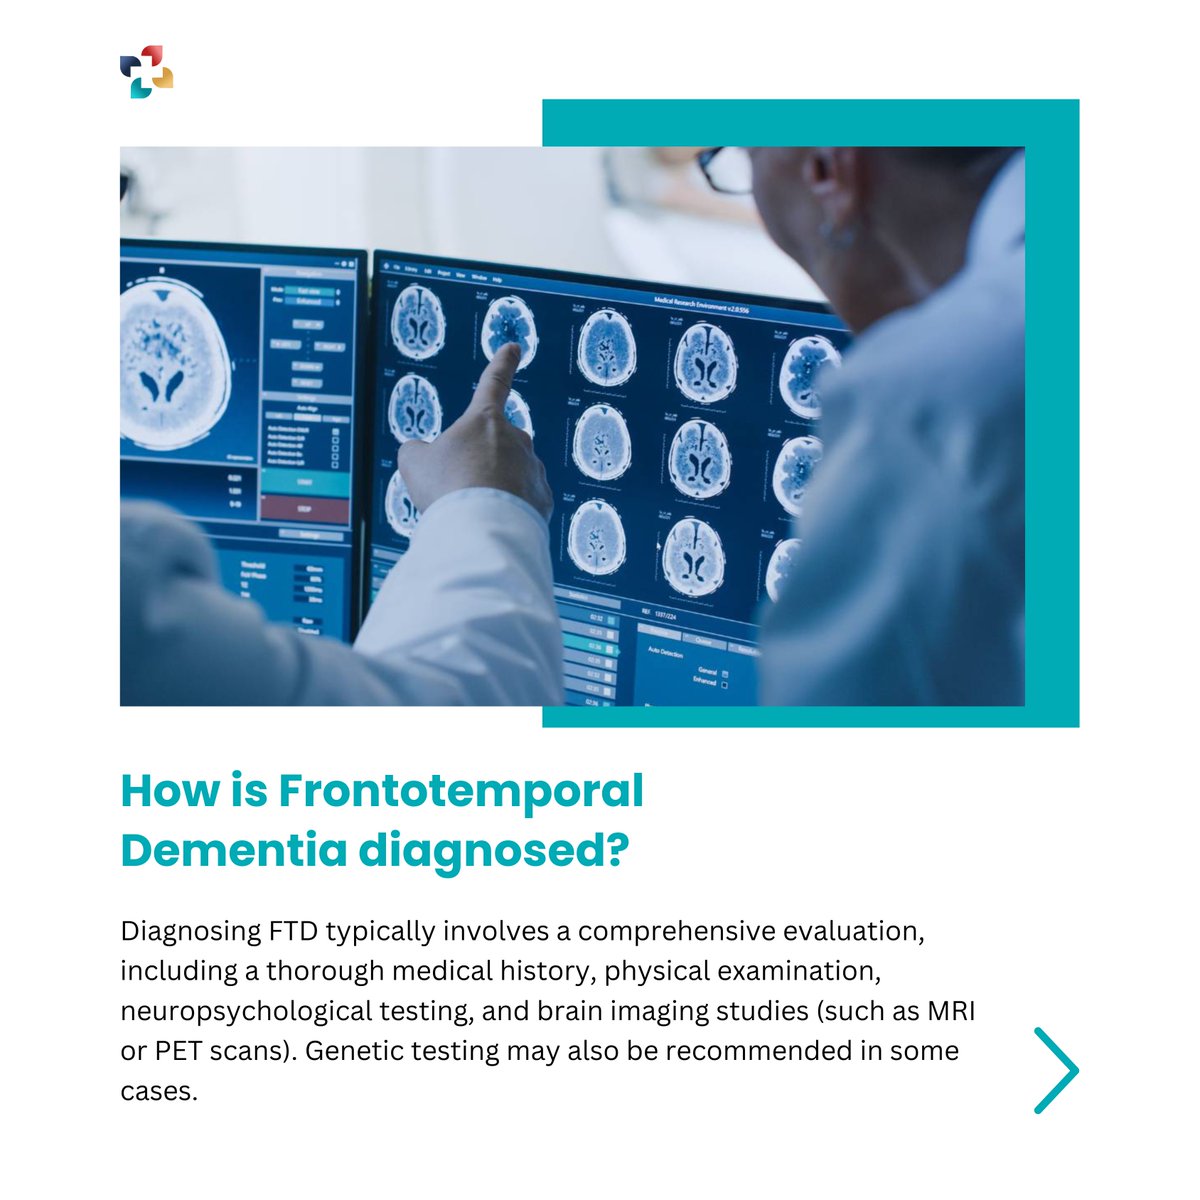 Frontotemporal dementia (FTD) is a progressive neurodegenerative disorder that primarily affects the frontal and temporal lobes of the brain, leading to changes in behavior, personality, and language skills. 

Know More: thelifesciencesmagazine.com/understanding-…

#FTD #dementiaawareness #neurology